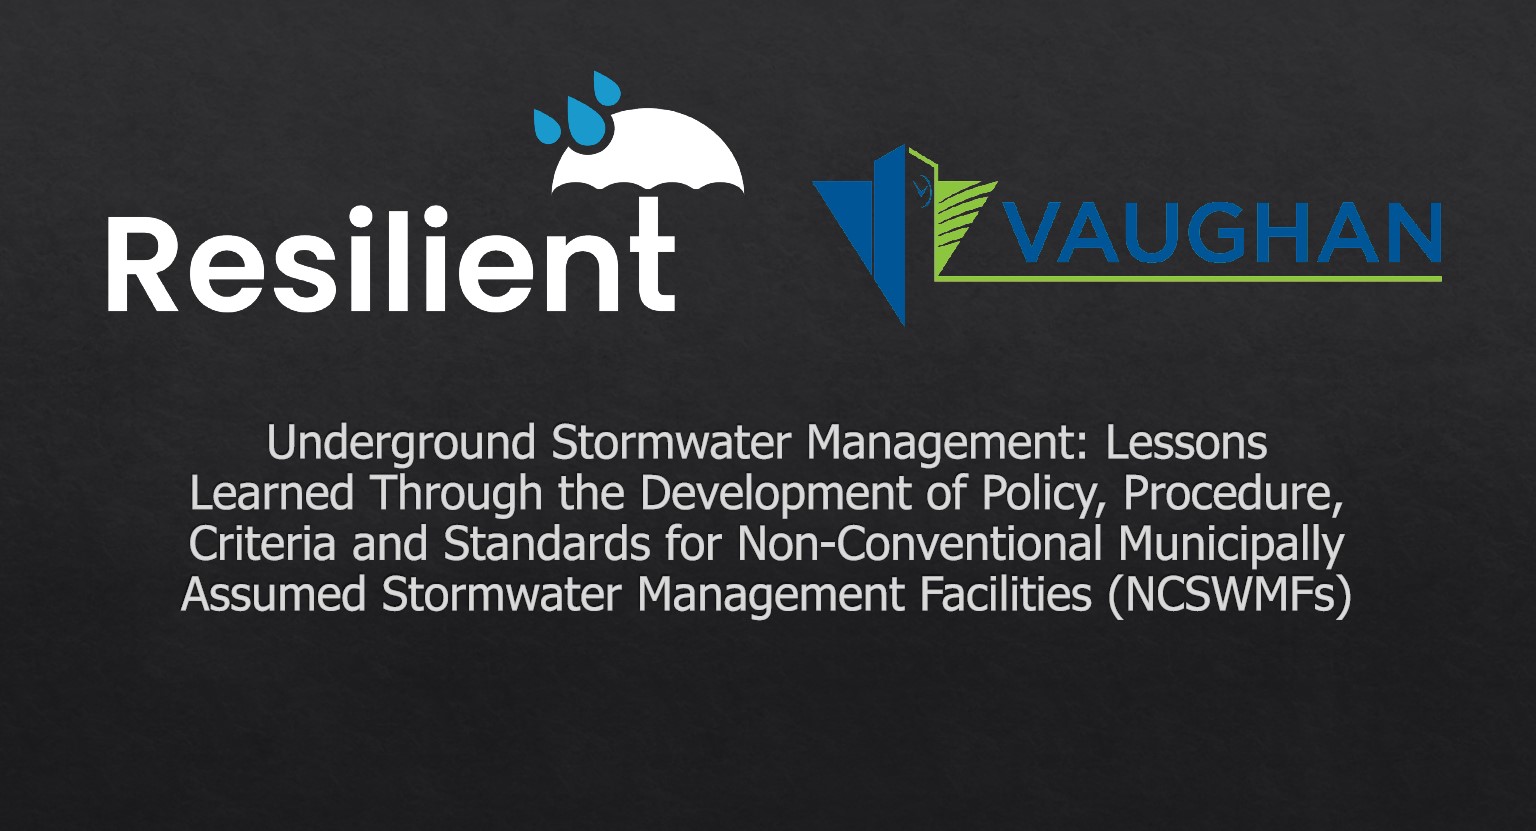 Underground Stormwater Management - Lessons Learned Through the Development of Policy, Procedure, Criteria and Standards for Non-Conventional Municipally Assumed Stormwater Management Facilities - Presentation by Rebecca Turbitt and Saad Yousaf